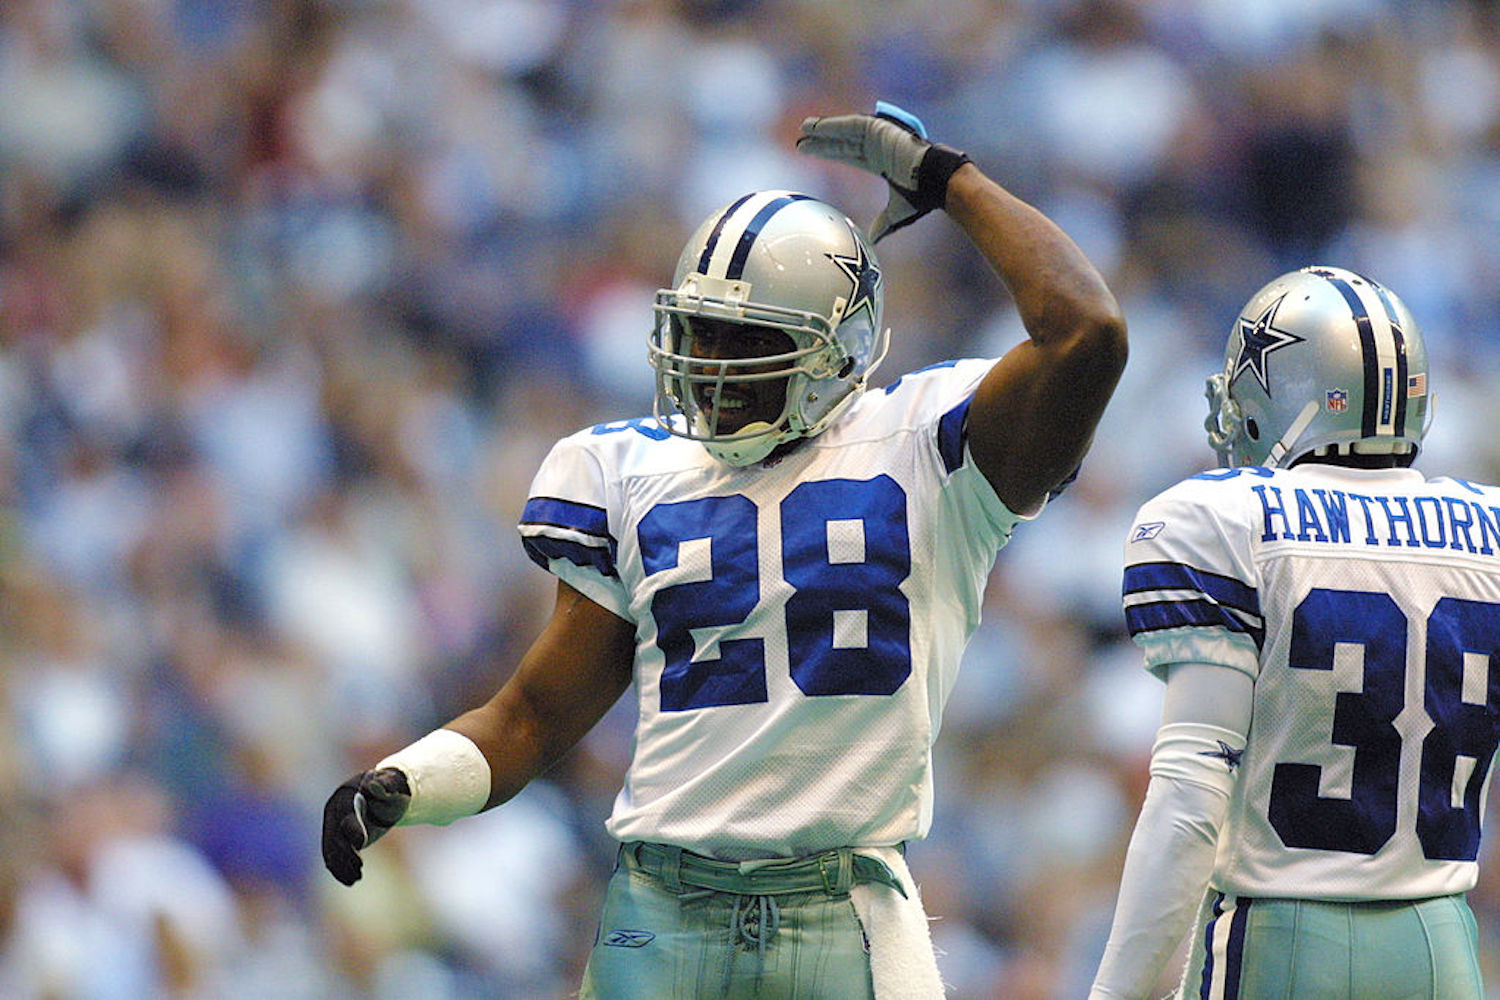 Darren Woodson left his heart and soul on the field with the Dallas Cowboys, so he's disgusted with the way their defense is playing in 2020.